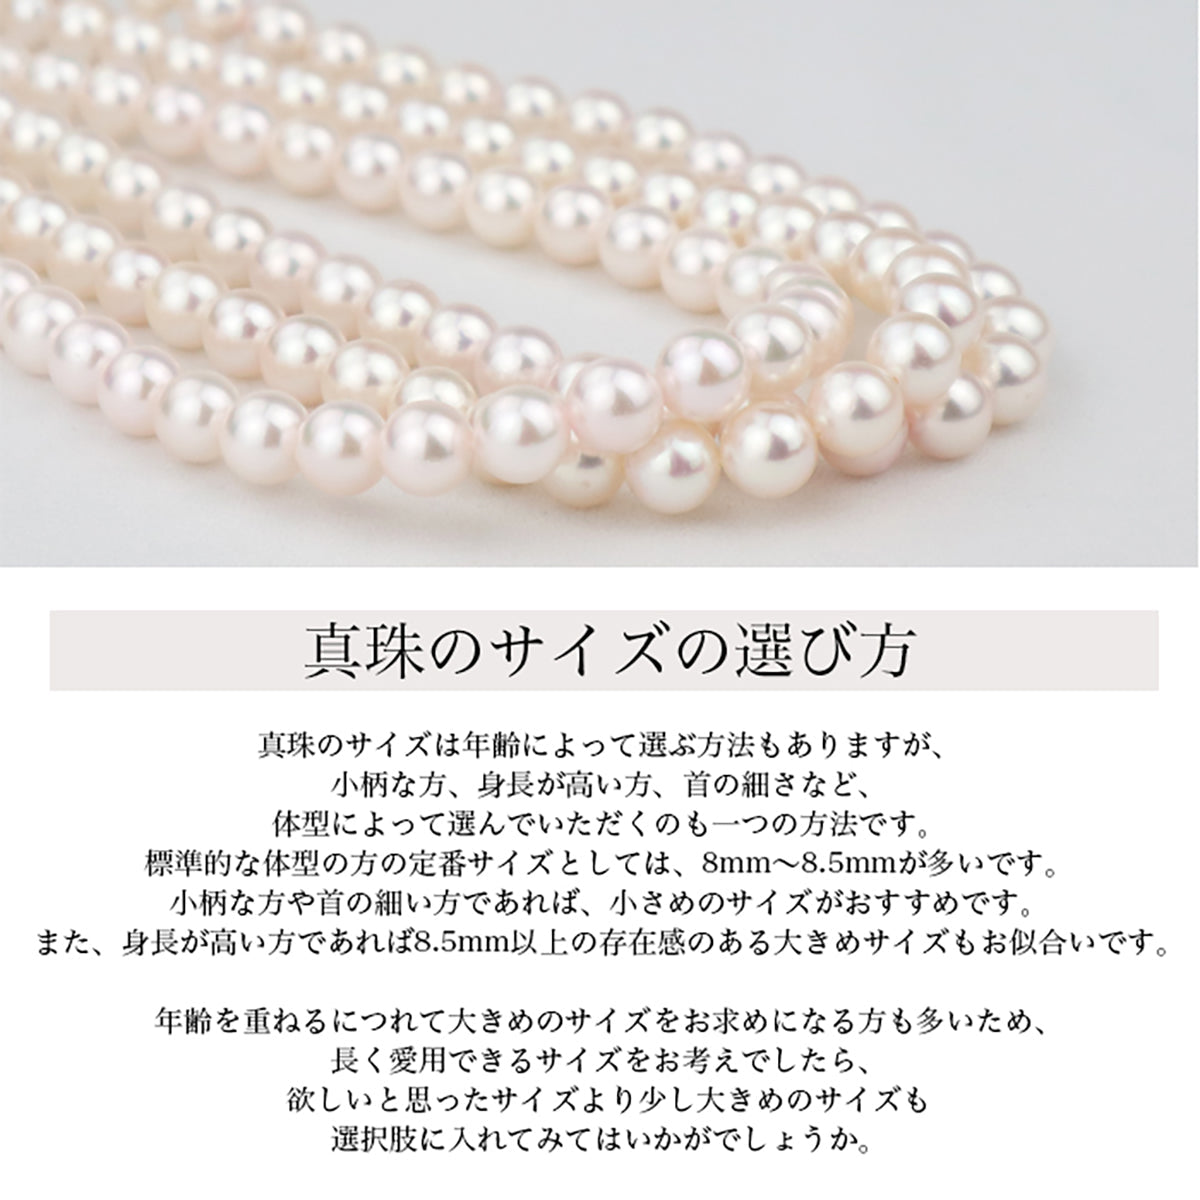 [Specially selected flower beads: Grace pearl] Formal necklace 2-piece set Akoya pearl earrings/pierced earrings [9.0-9.5mm] White Roll thickness 0.4mm or more Certificate of authenticity Storage case included